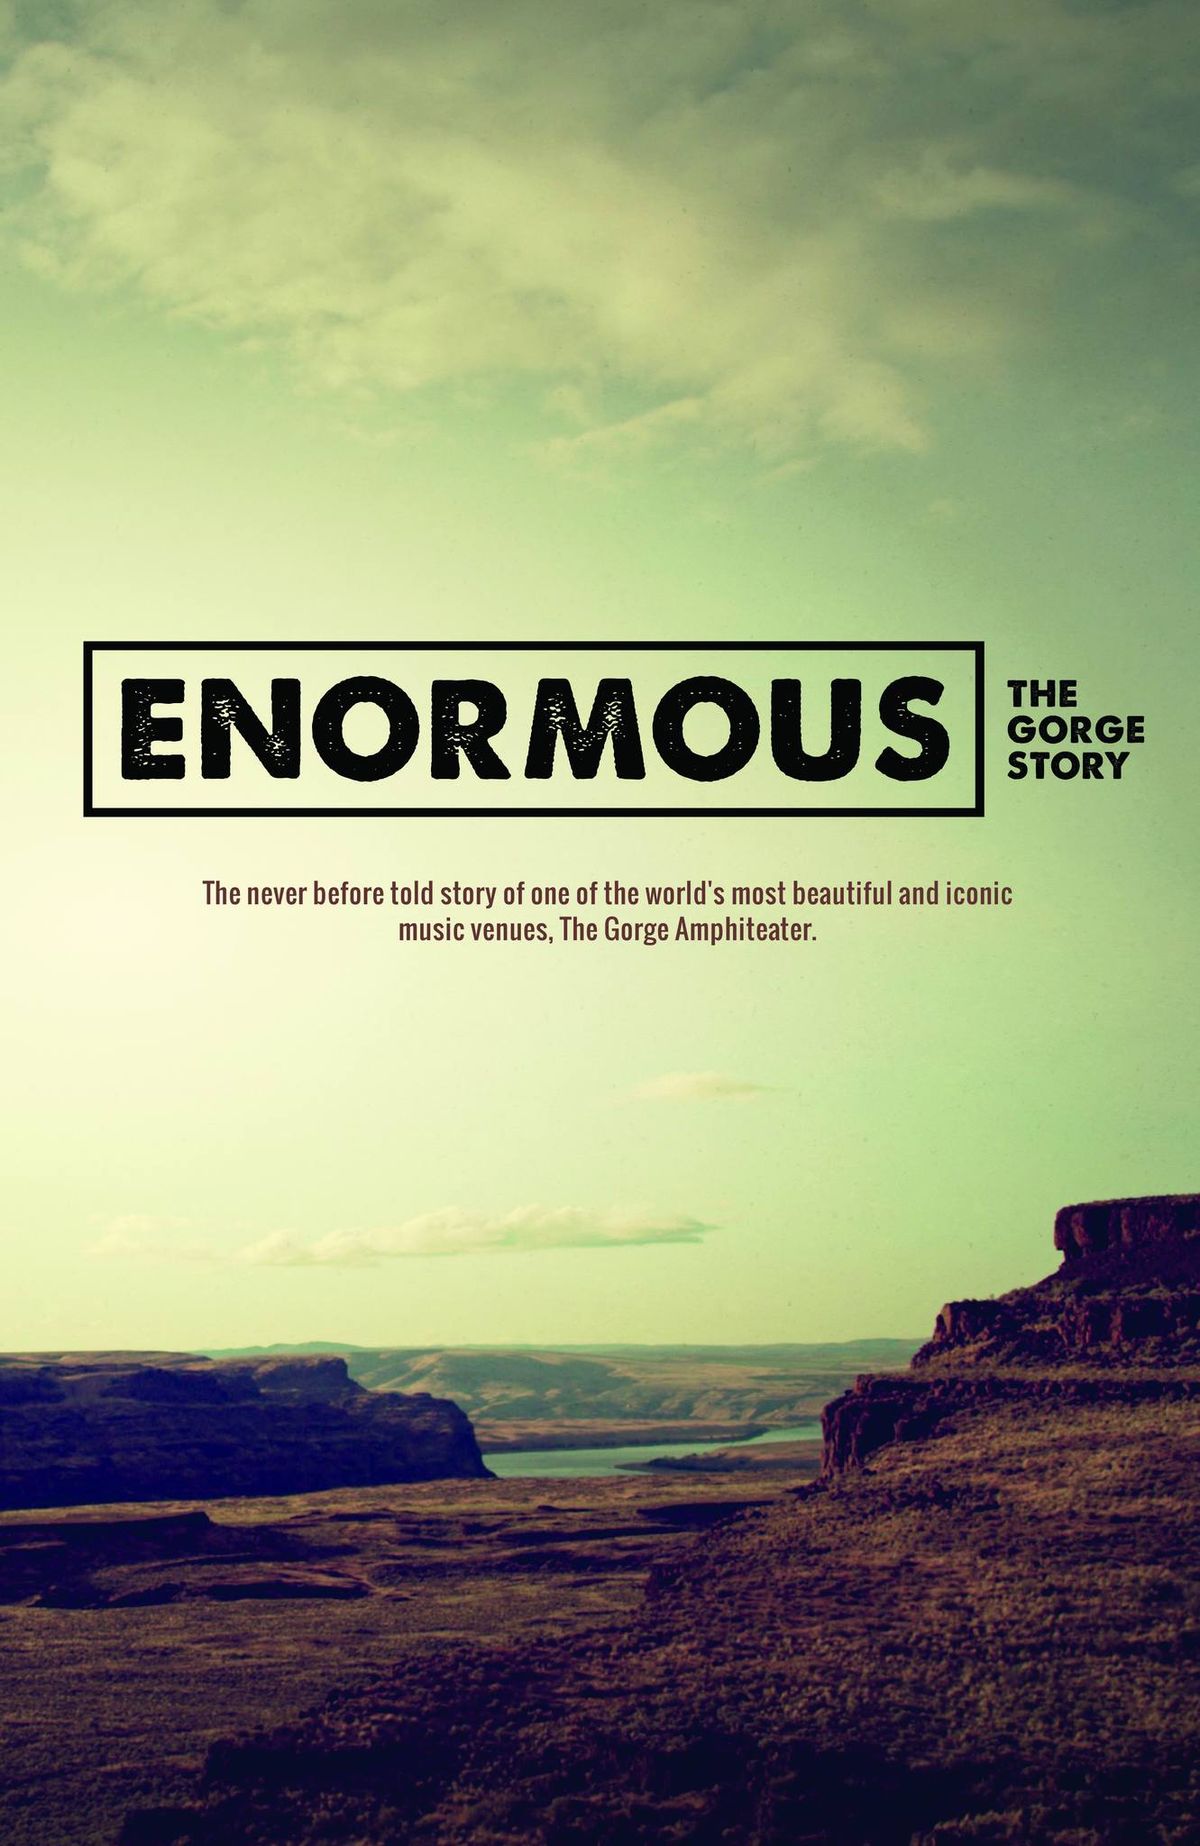 Enormous: The Gorge Story